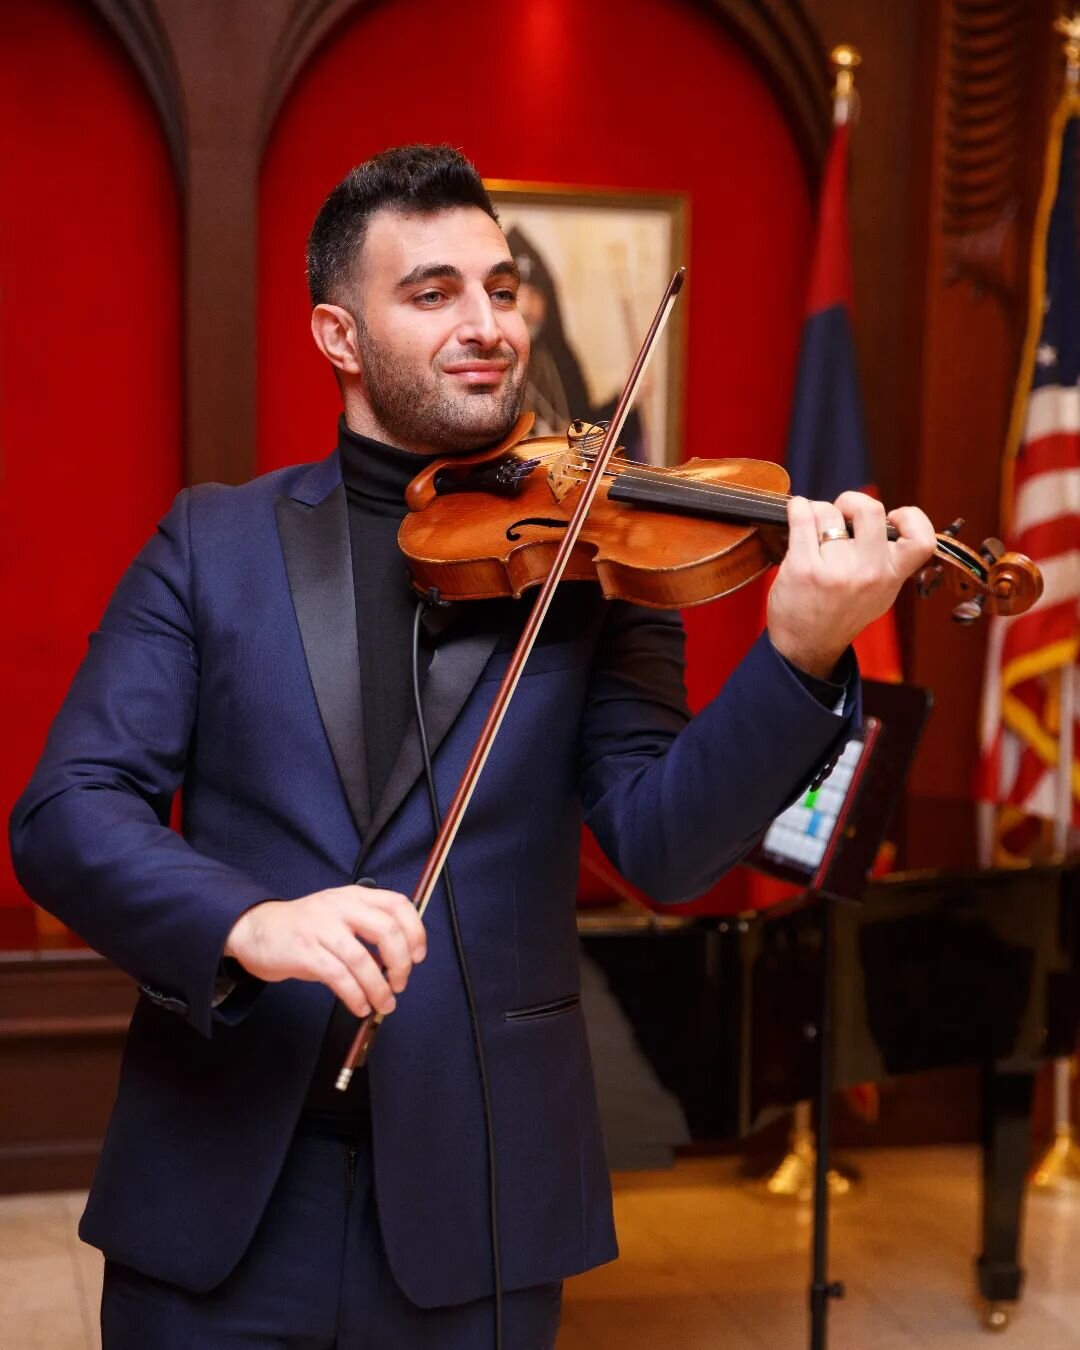 Thank you to Western Diocese of the Armenian Church for this photo from the recent 17th Annual Christmas Ball. ✨

📸 @westerndiocese
.
.
.
#ViolinistAshot
#westerndiocese #violin #violinist #violinplayer #violino #violinista #armenian #socaleventplan